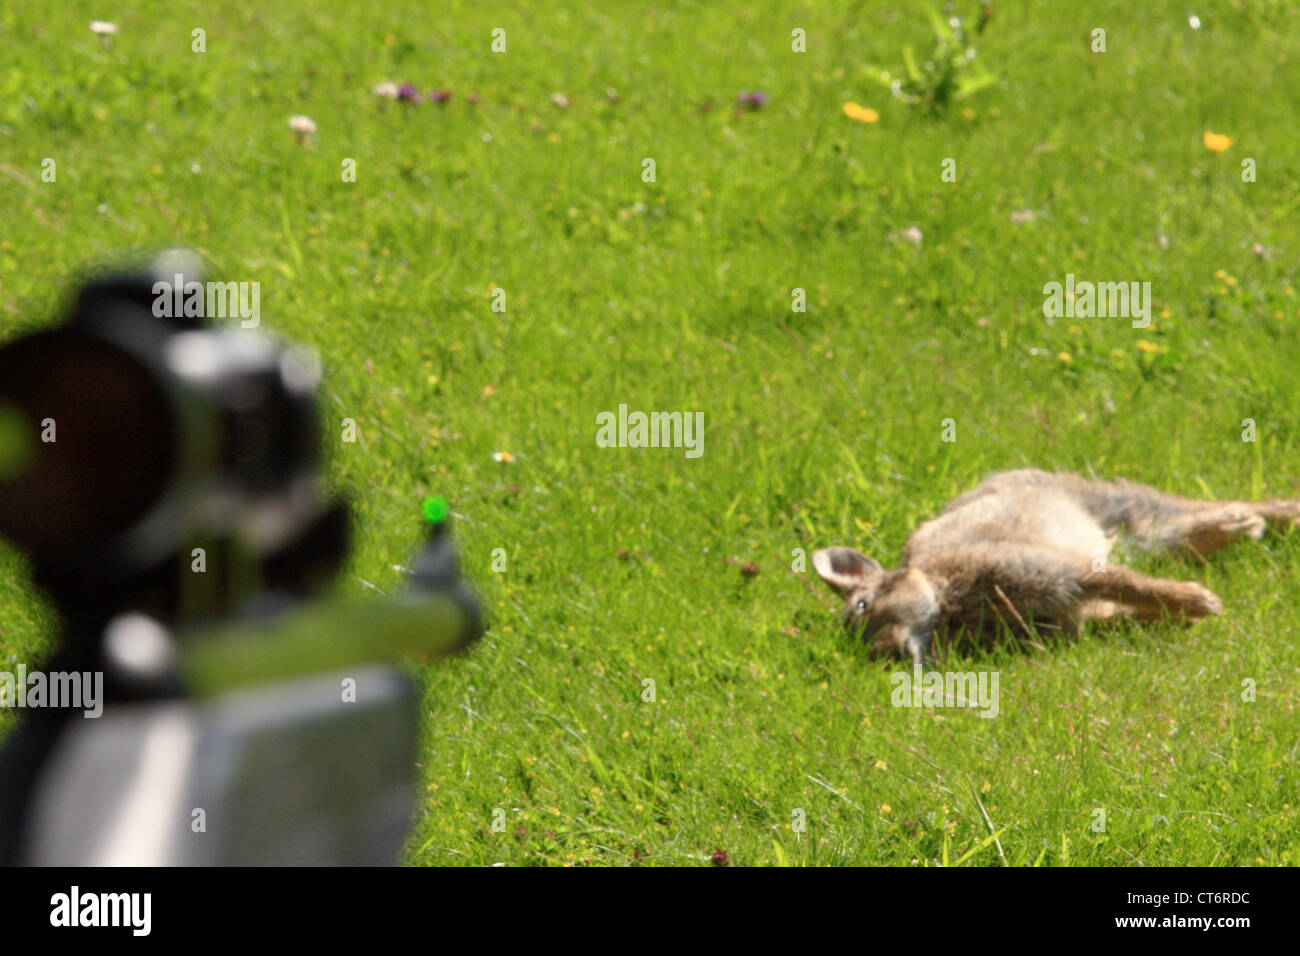 An air rifle aiming at a wild dead rabbit which had just been shot through an open window Stock Photo